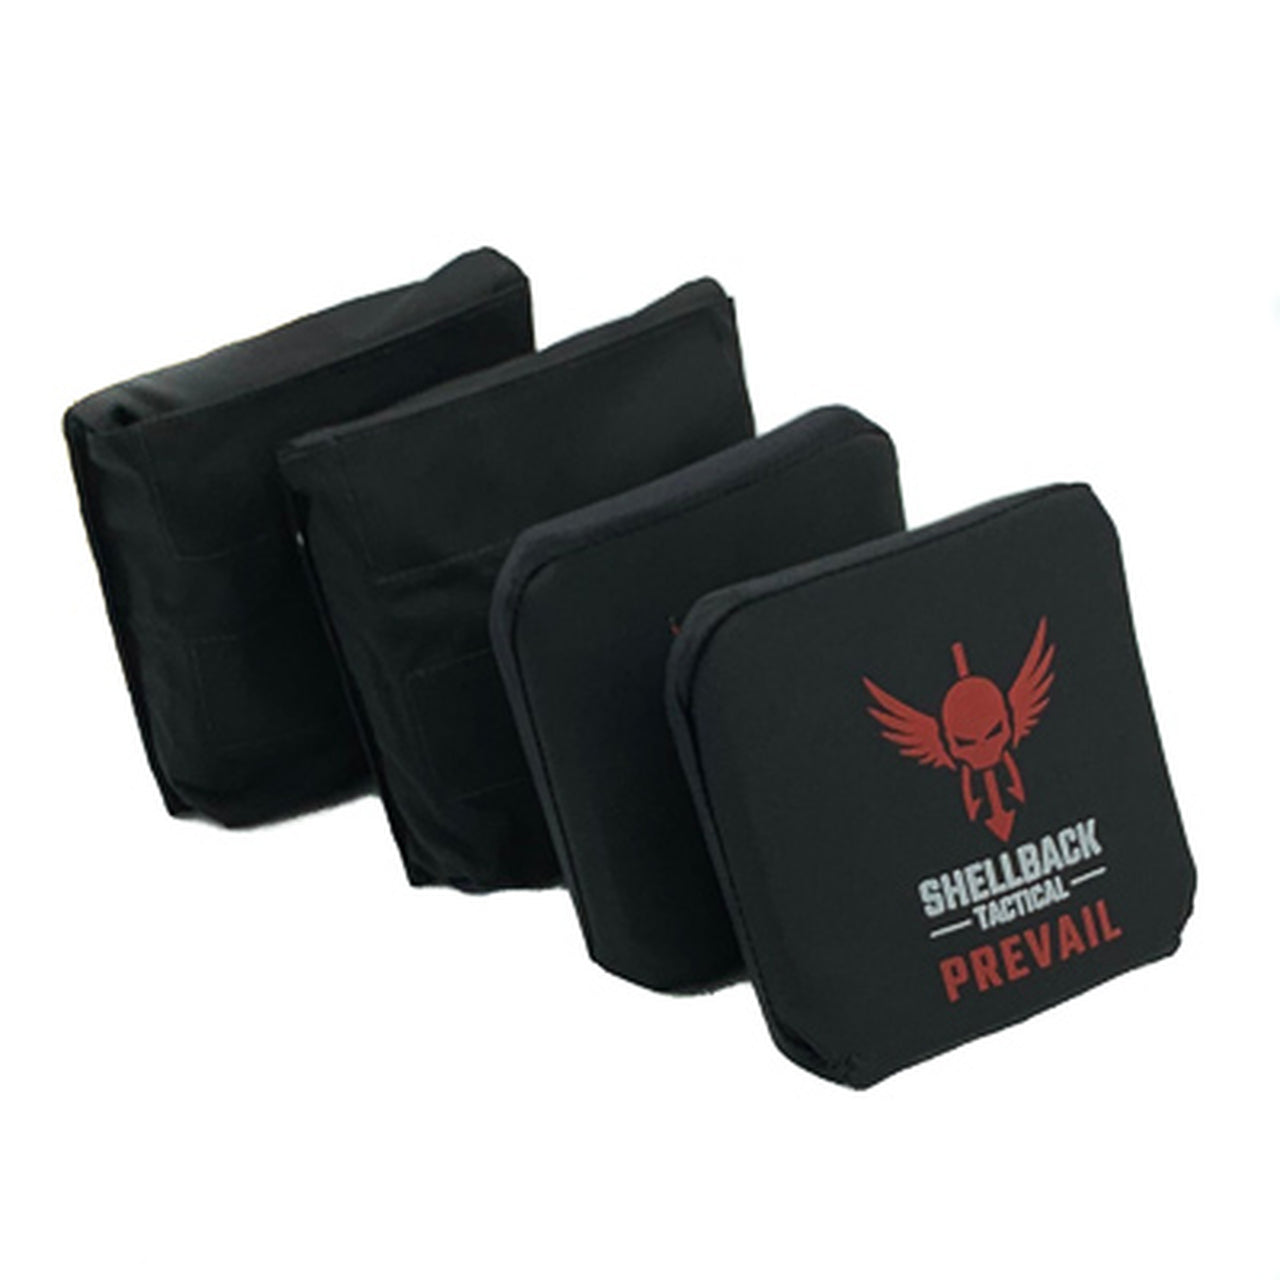 Three Shellback Tactical Side Armor Plate Kits with Level IV Model 4S17 Armor Plates.